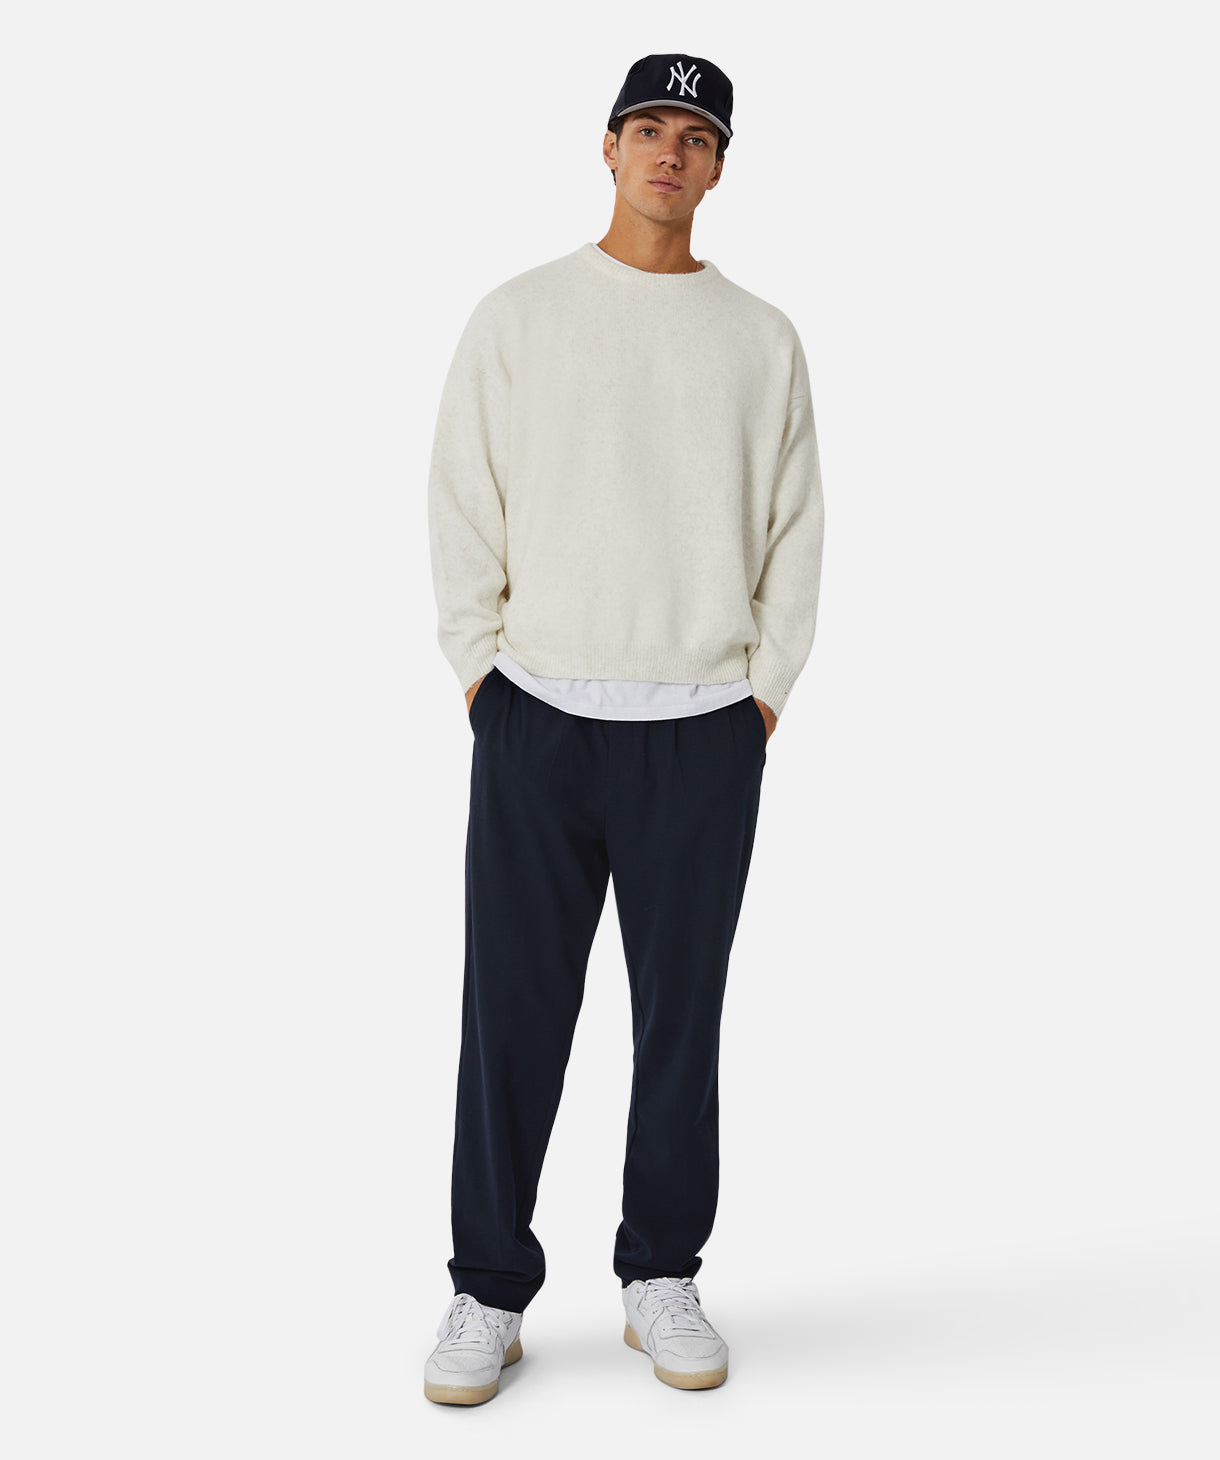 Shop The Shelton Knit in Cream | Industrie Clothing – Industrie ...